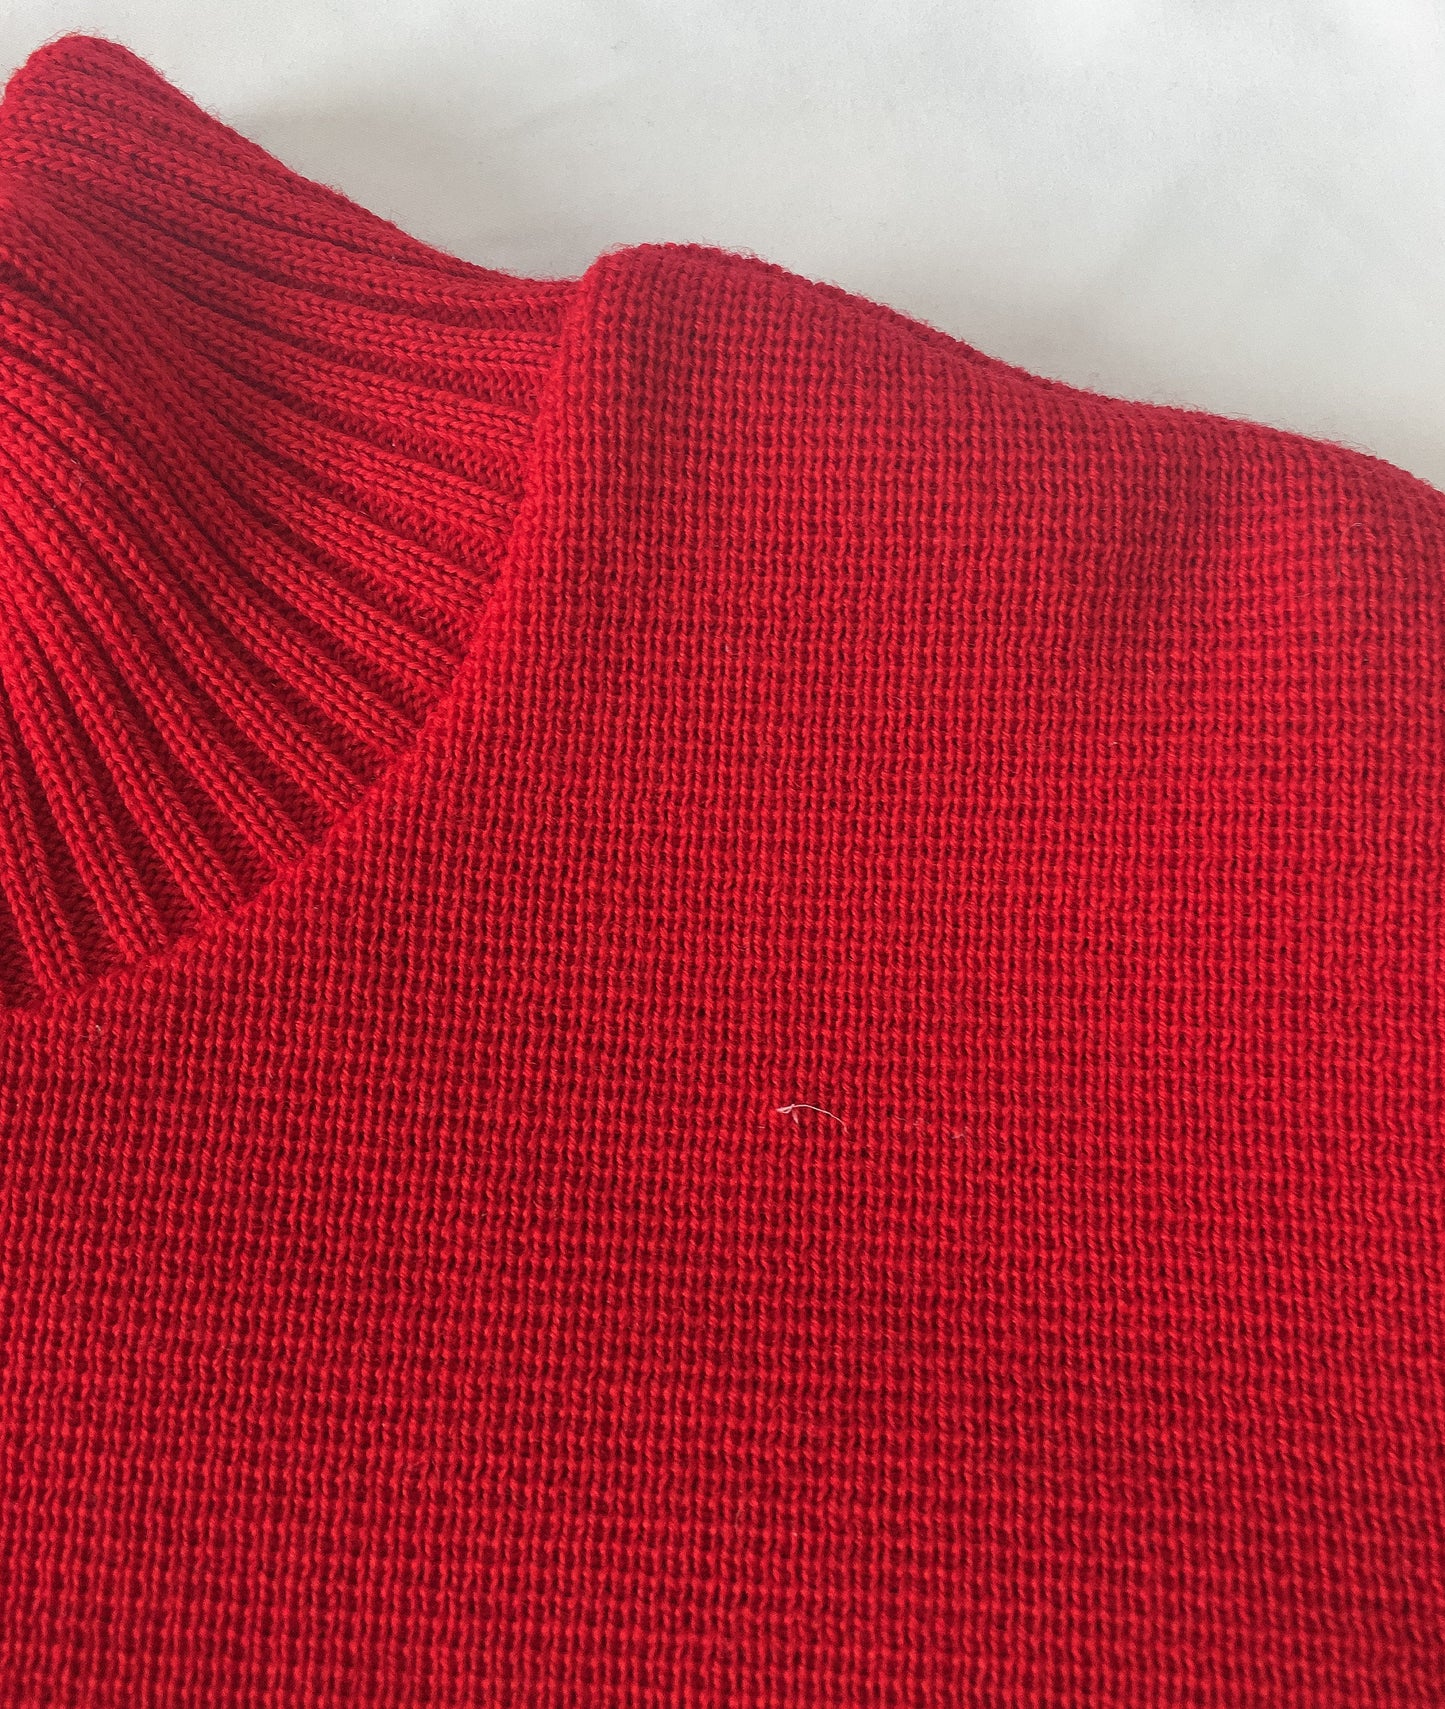 Vintage Norskwear Red & Cream/Off-White 100% Wool Zip-Up Sweater, Sz. S, Made in Norway